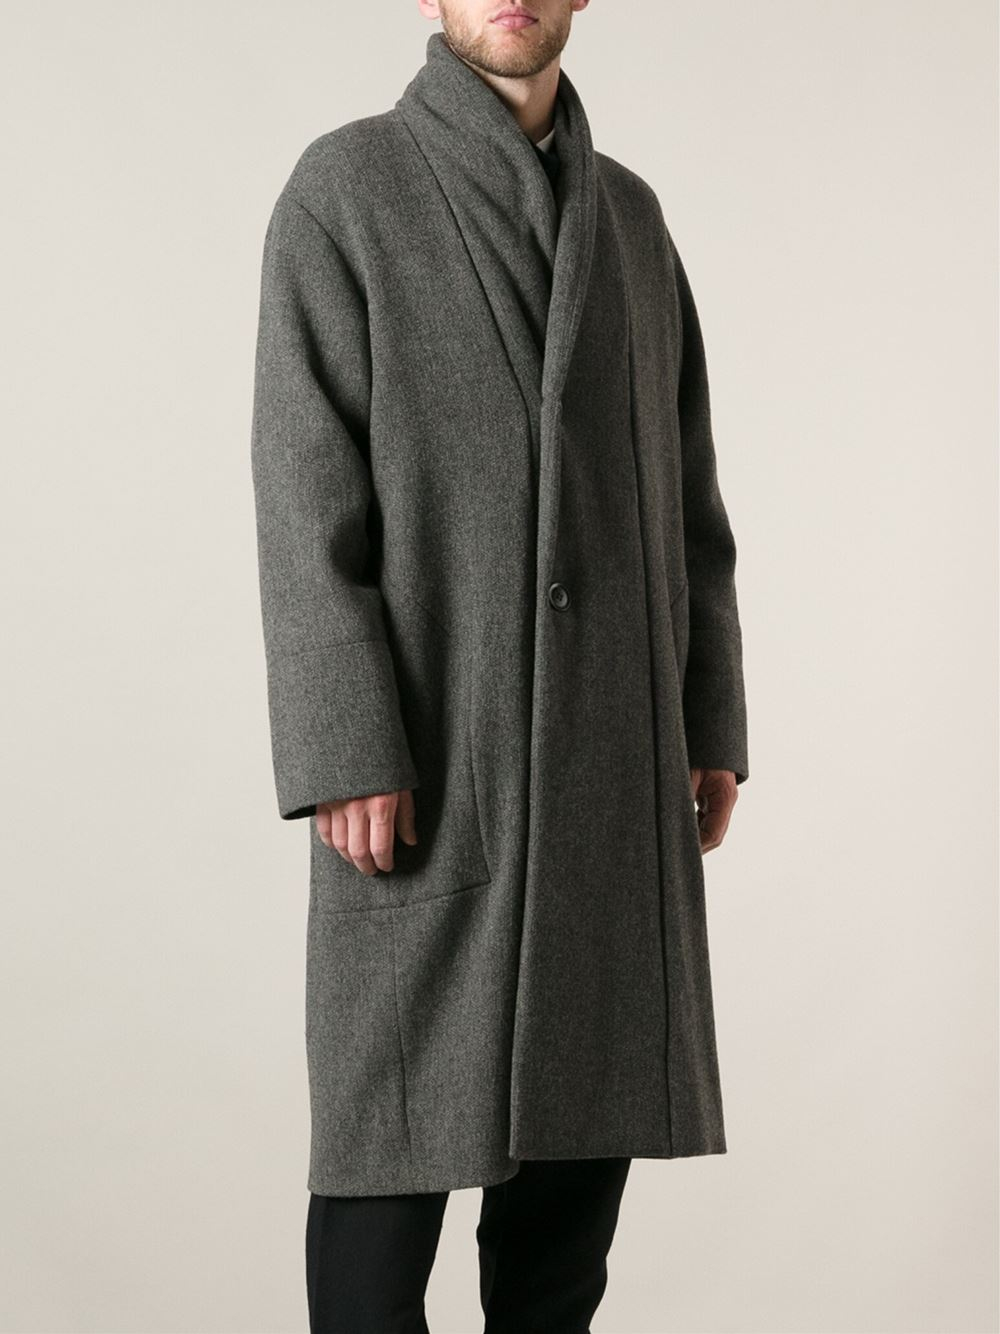 Lyst - Christophe Lemaire Wrap Style Coat in Gray for Men